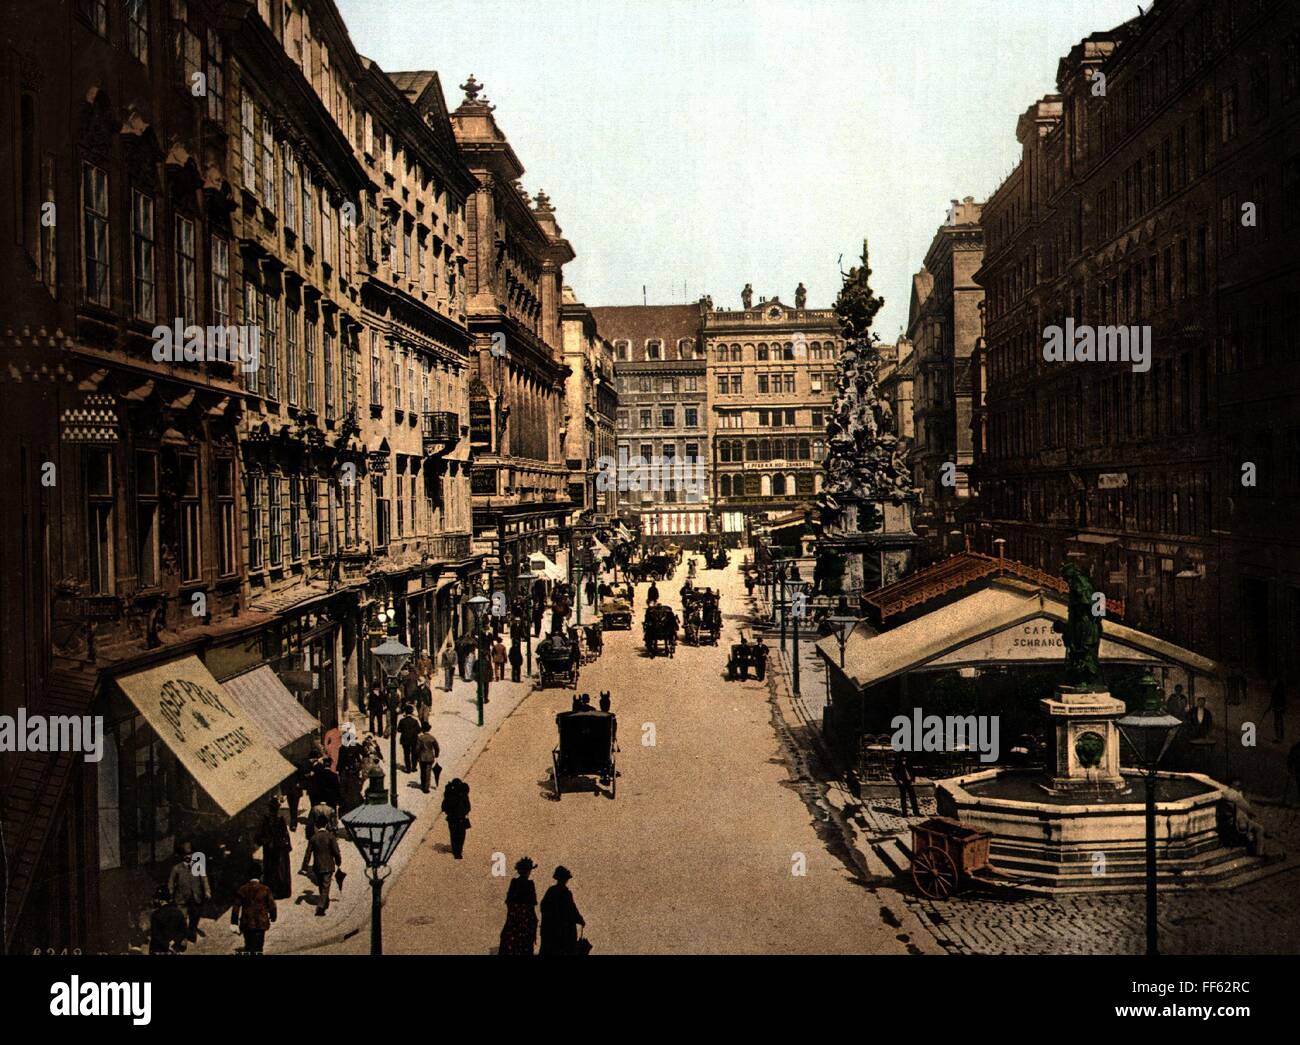 geography / travel, Austria, Vienna, Der Graben, coloured, historic, historical, at the turn of the 19th / 20th century, coach, carriage, coaches, carriages, traffic volume, fountain, cart, Venetian blind, blinds, sunblind, awning, marquee, sunblinds, awnings, marquees, inner city, midtown, city centre, town centre, urban core, old town, capital, metropolis, street scene, street scenes, pedestrian, pedestrians, passer-by, passerby, passers-by, Central Europe, people, Additional-Rights-Clearences-Not Available Stock Photo